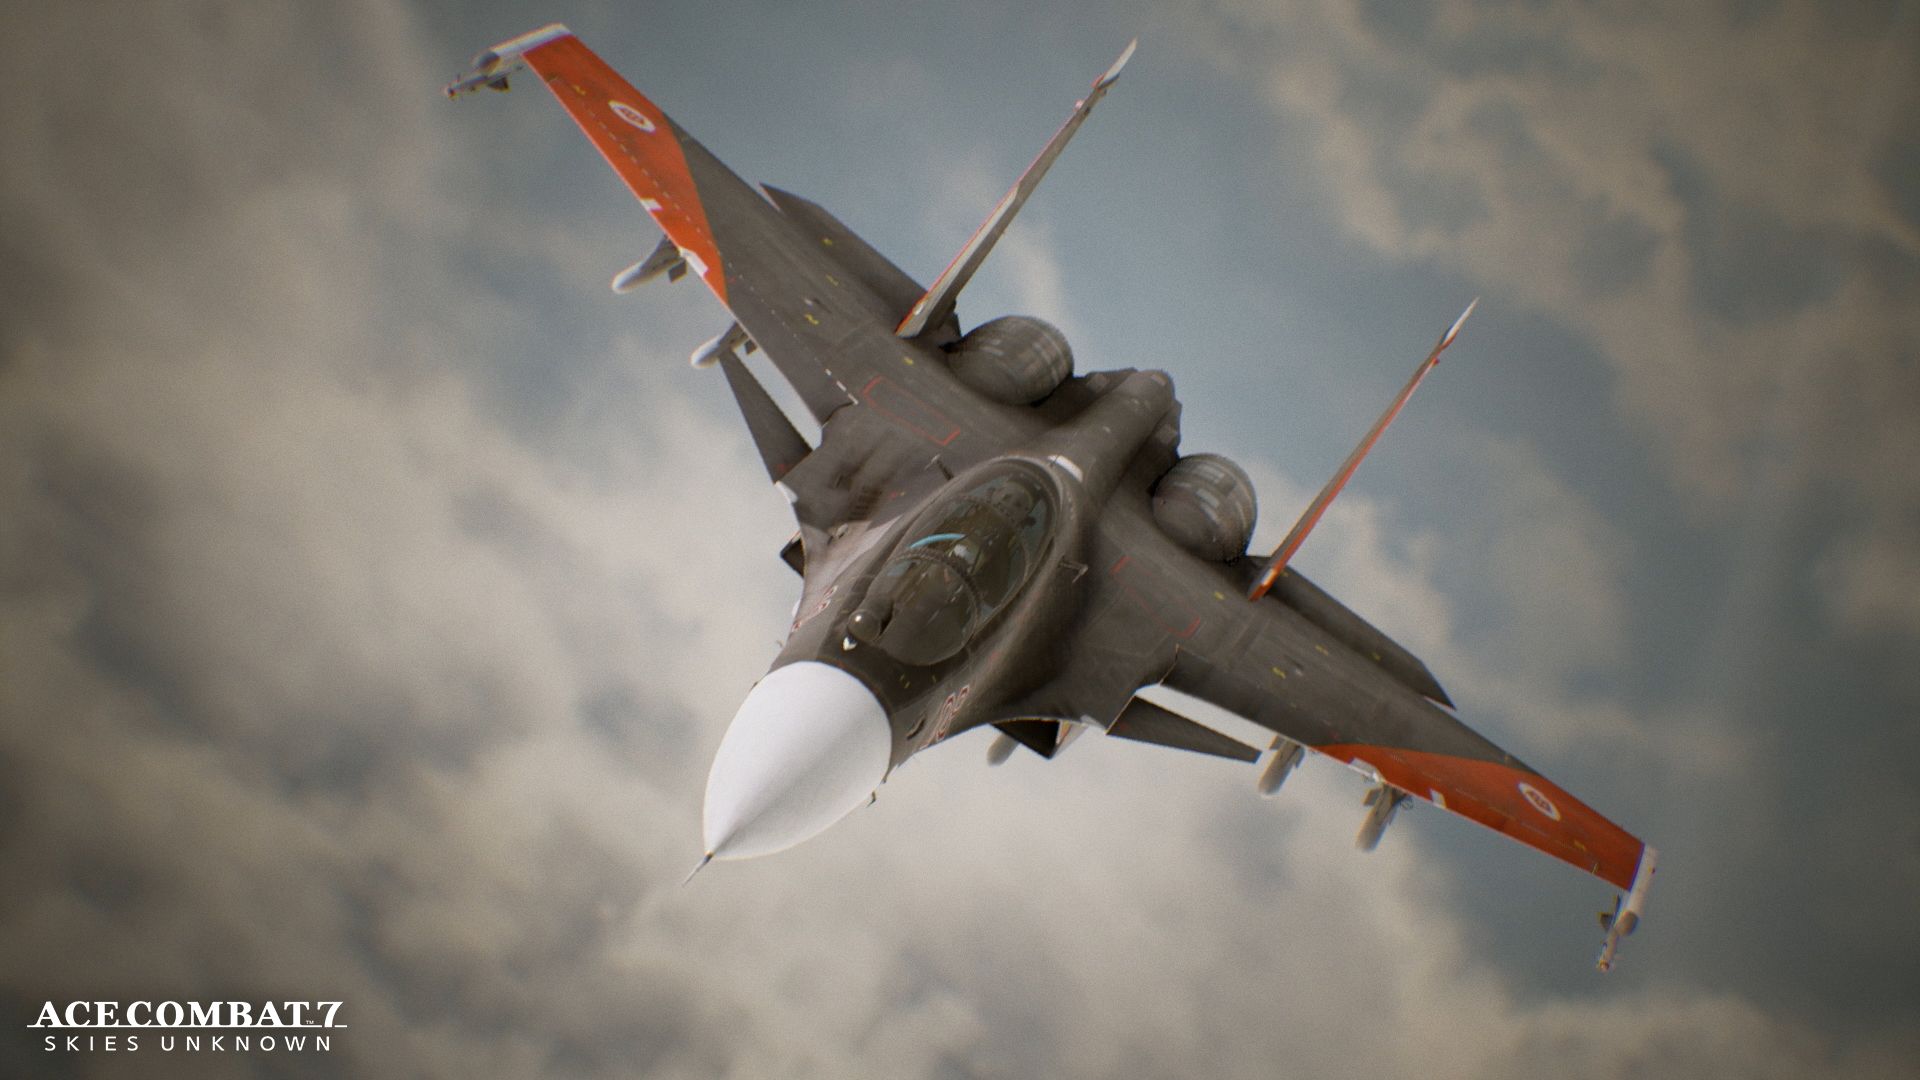 Ace Combat 7: Skies Unknown Official PC System Requirements